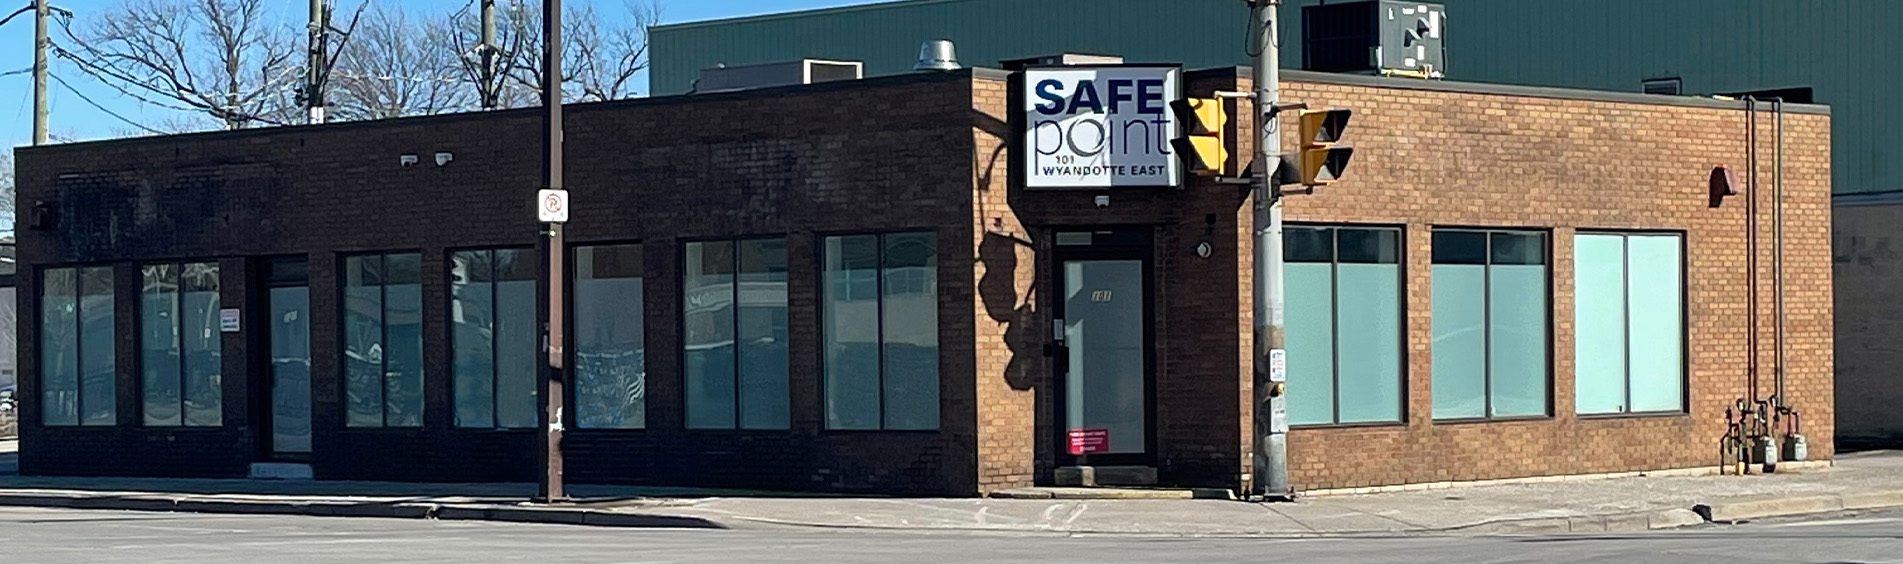 Photo of the SafePoint building